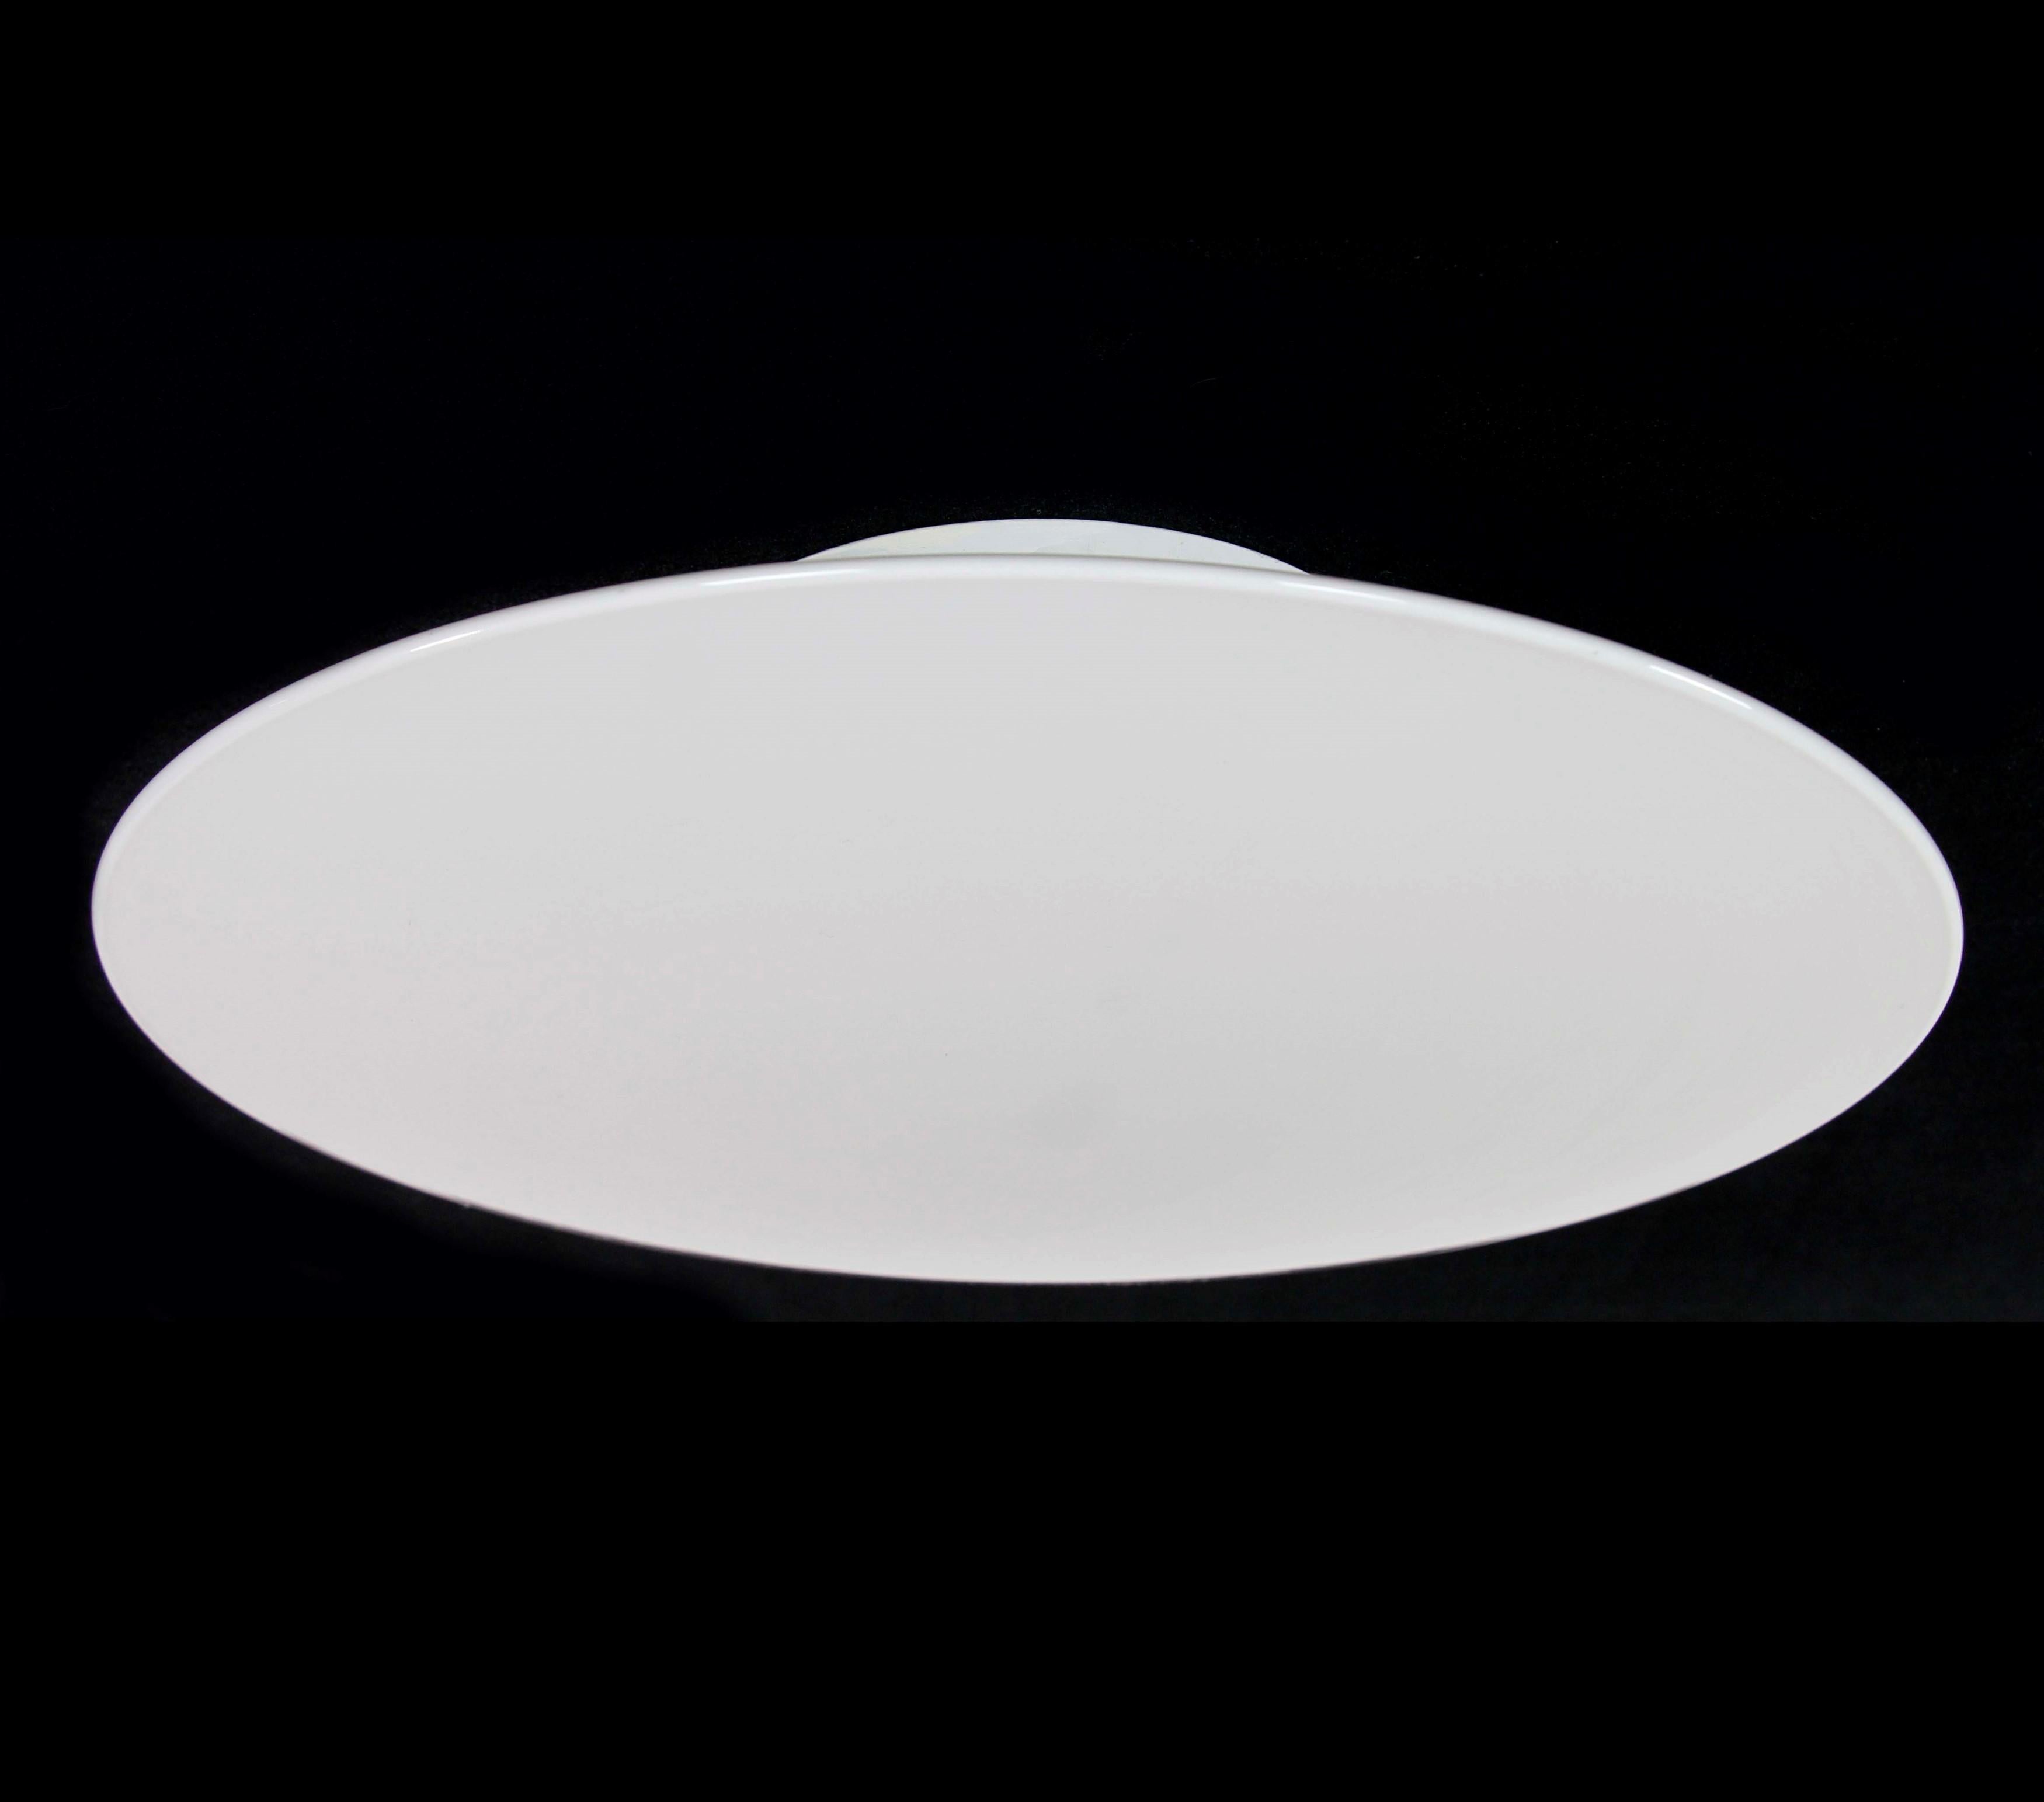 This European flush mount light captures minimalist elegance. With a round white glass shade, it embodies contemporary European design. This flush mount light adds a touch of modern sophistication to spaces, providing functional illumination while